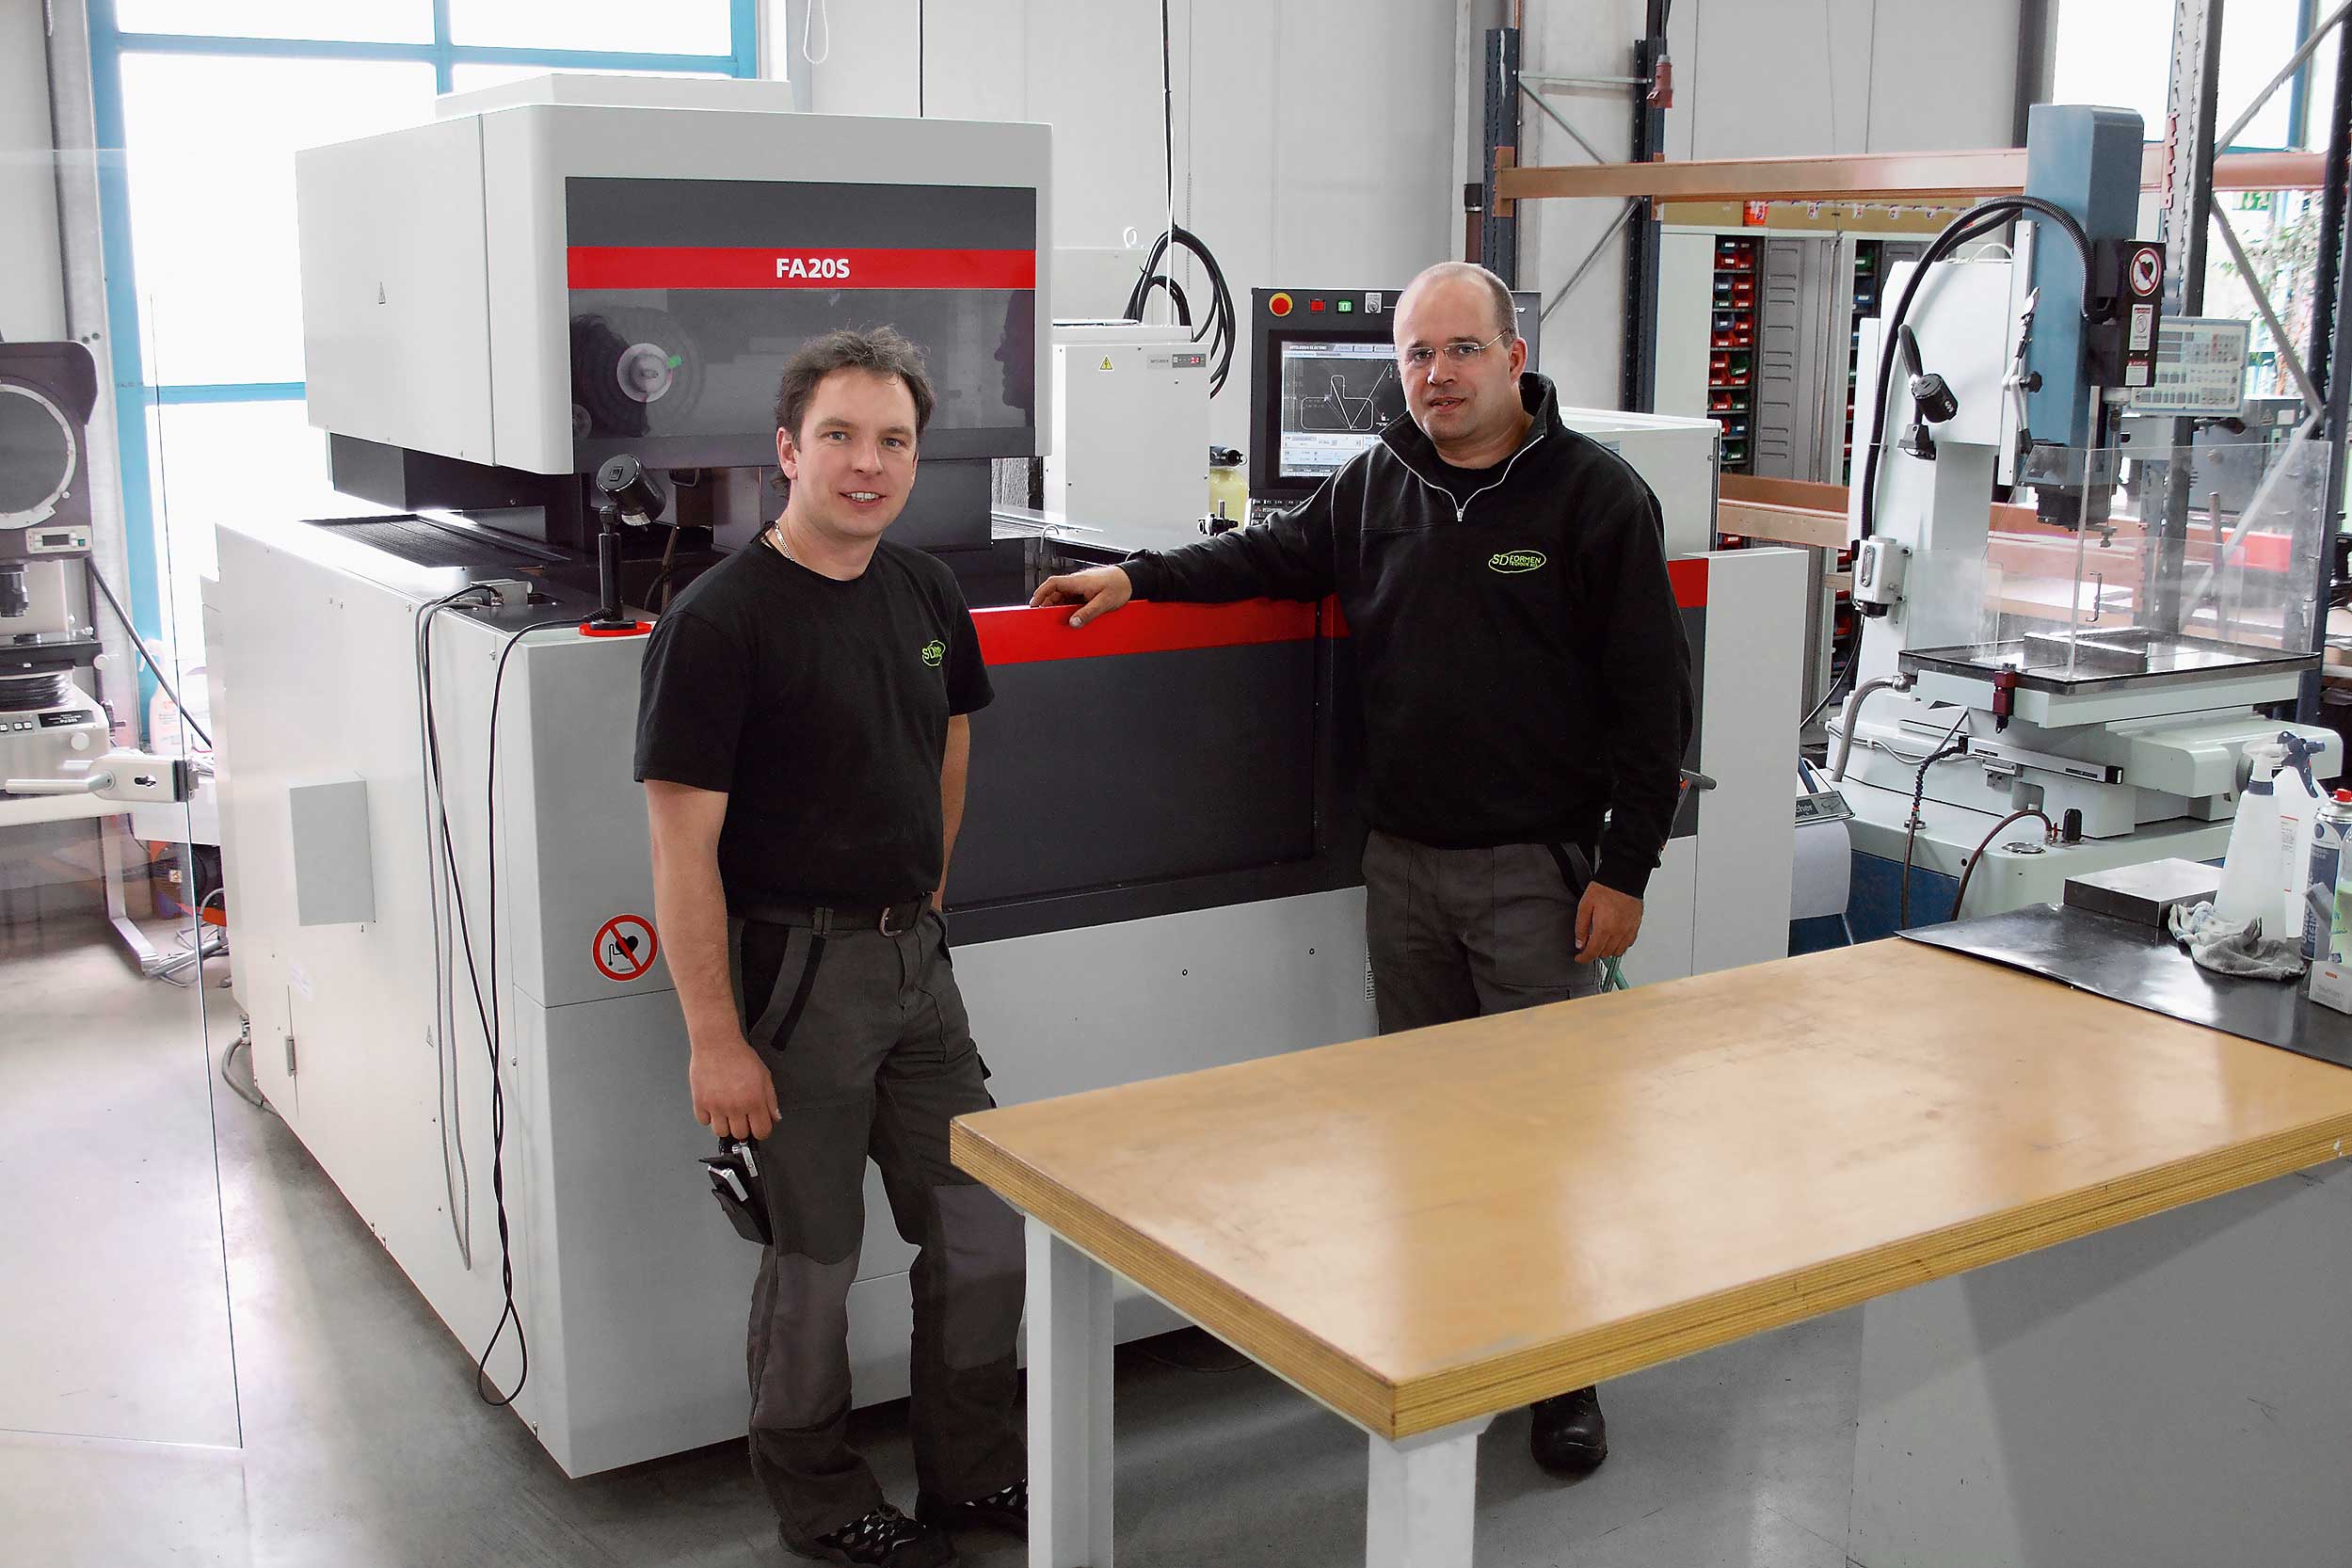 Jens Dryzynski and Holger Schulte, managers of SD Formentechnik KG, have included the FA20-S Advance V wire-cut erosion system from Mitsubishi Electric in their machine park.